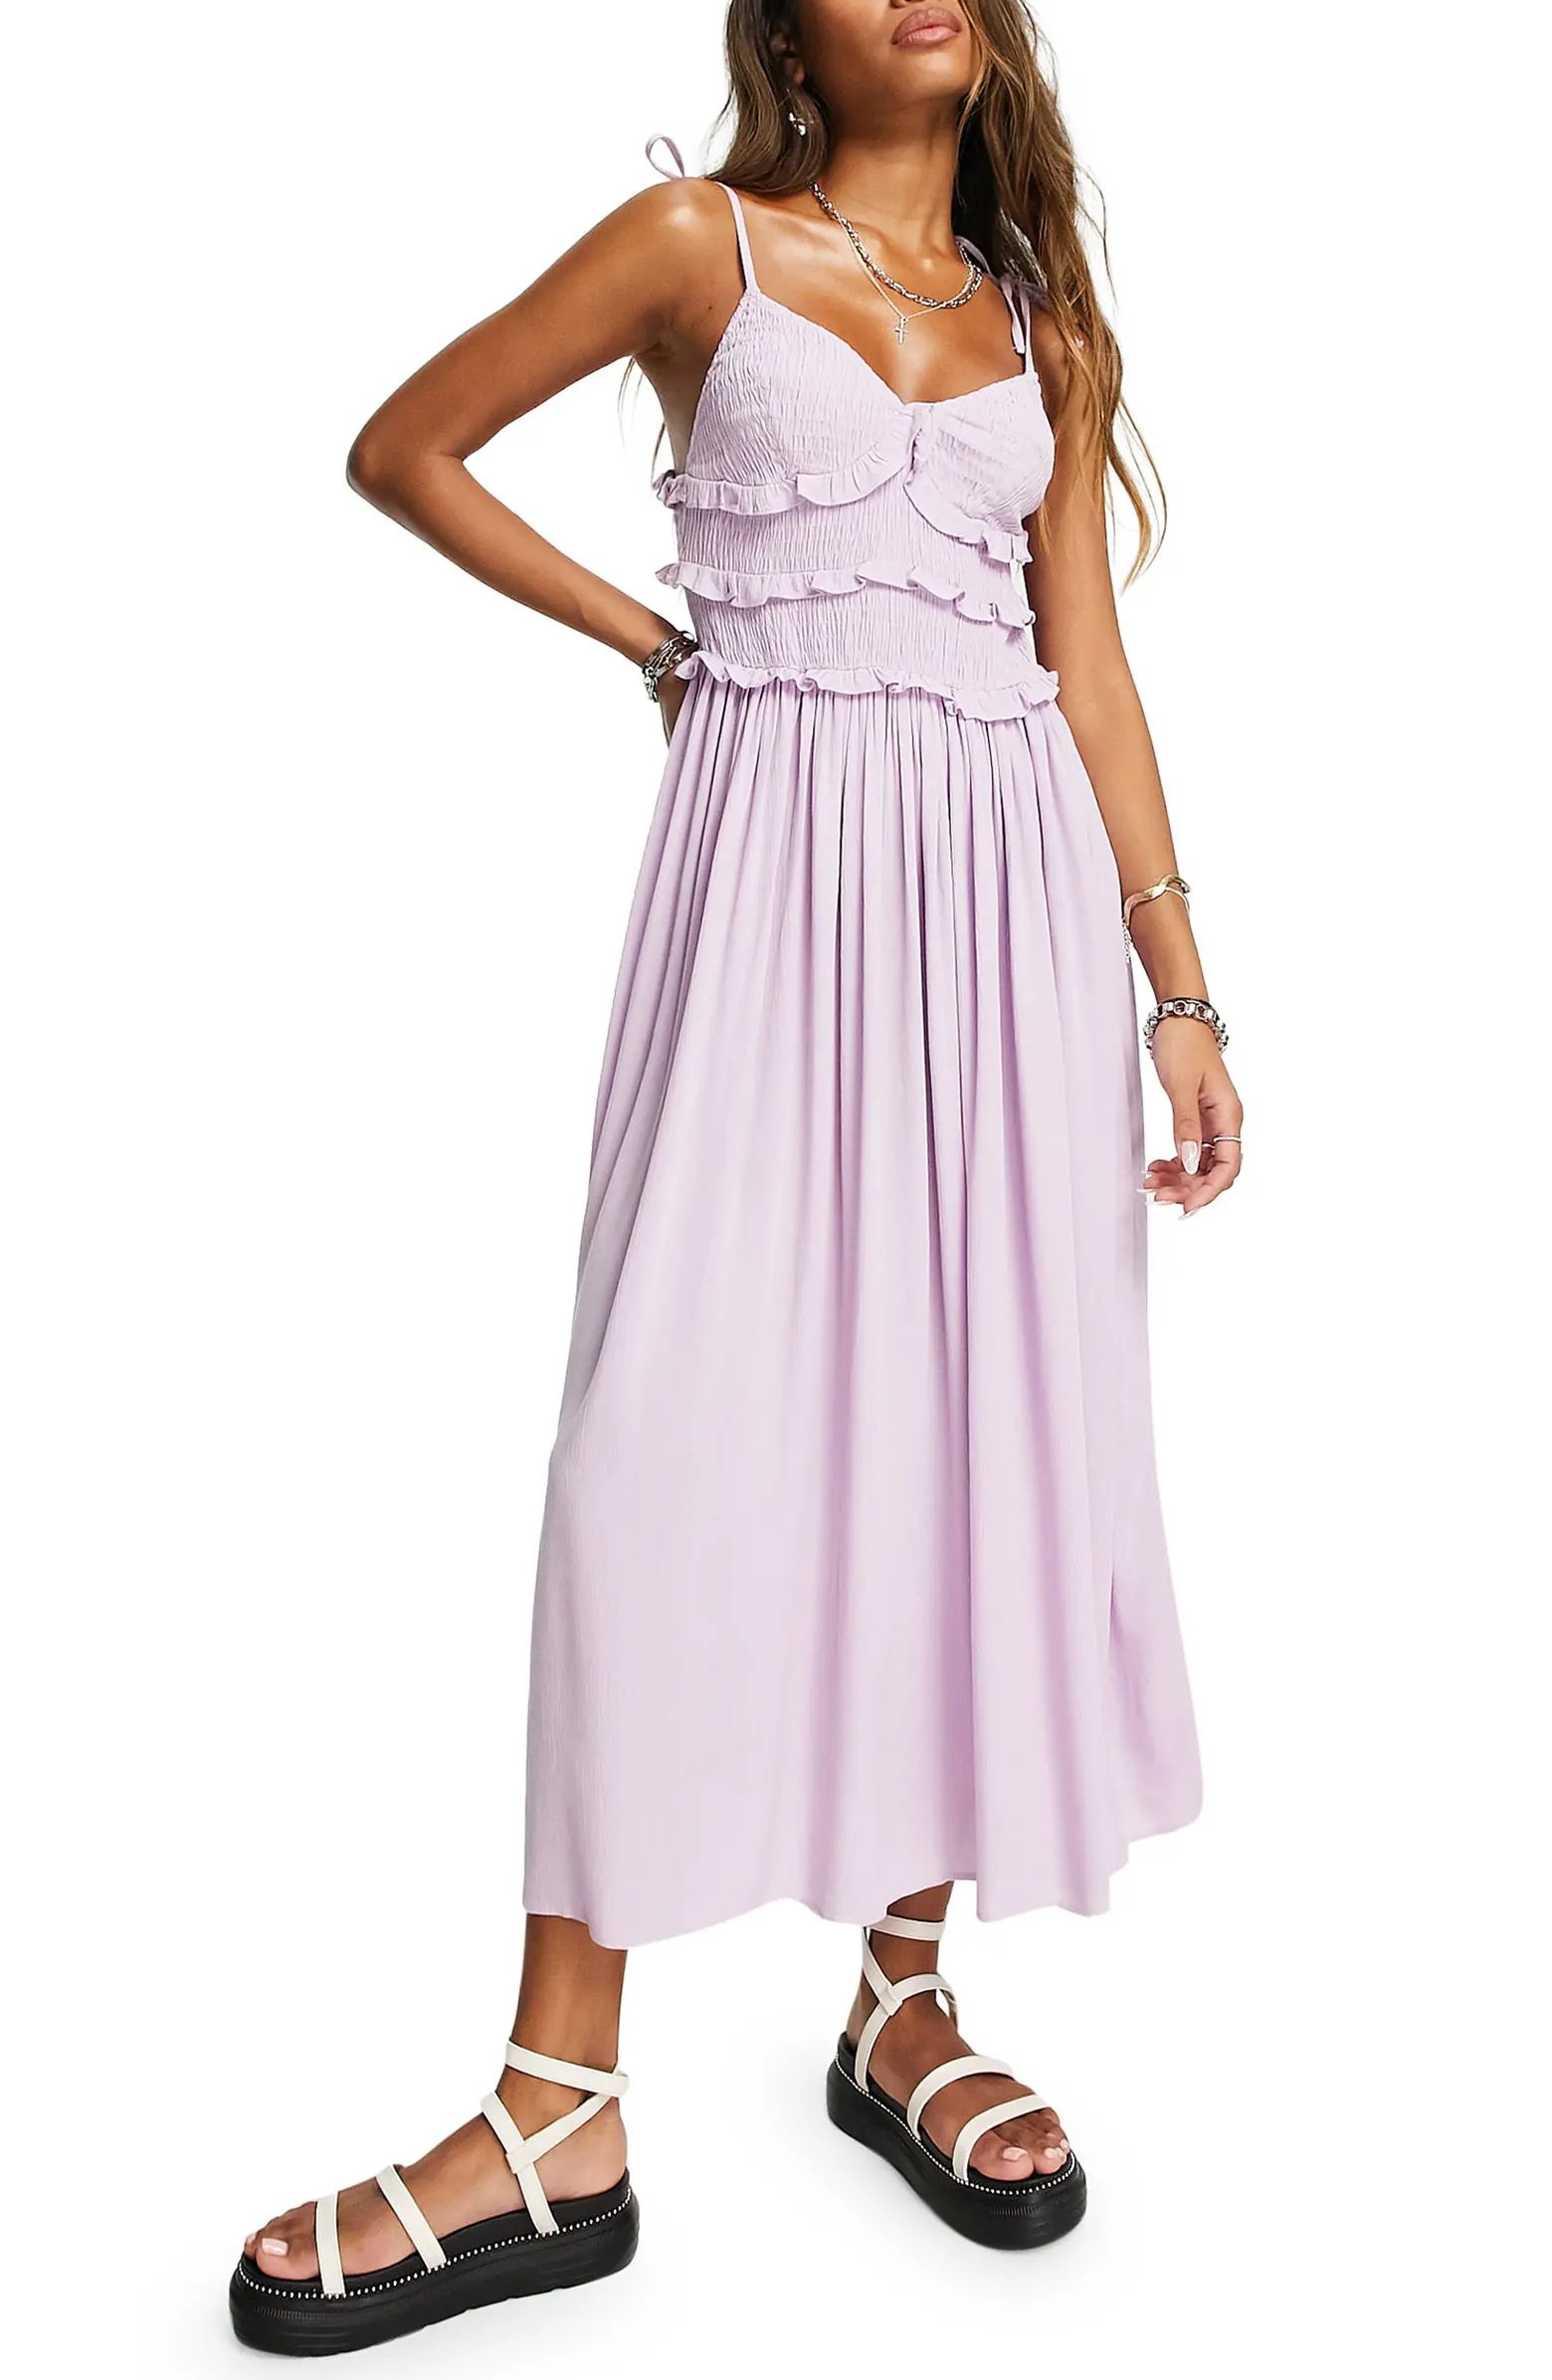 Reconnected Sleeveless Dress | Nordstrom